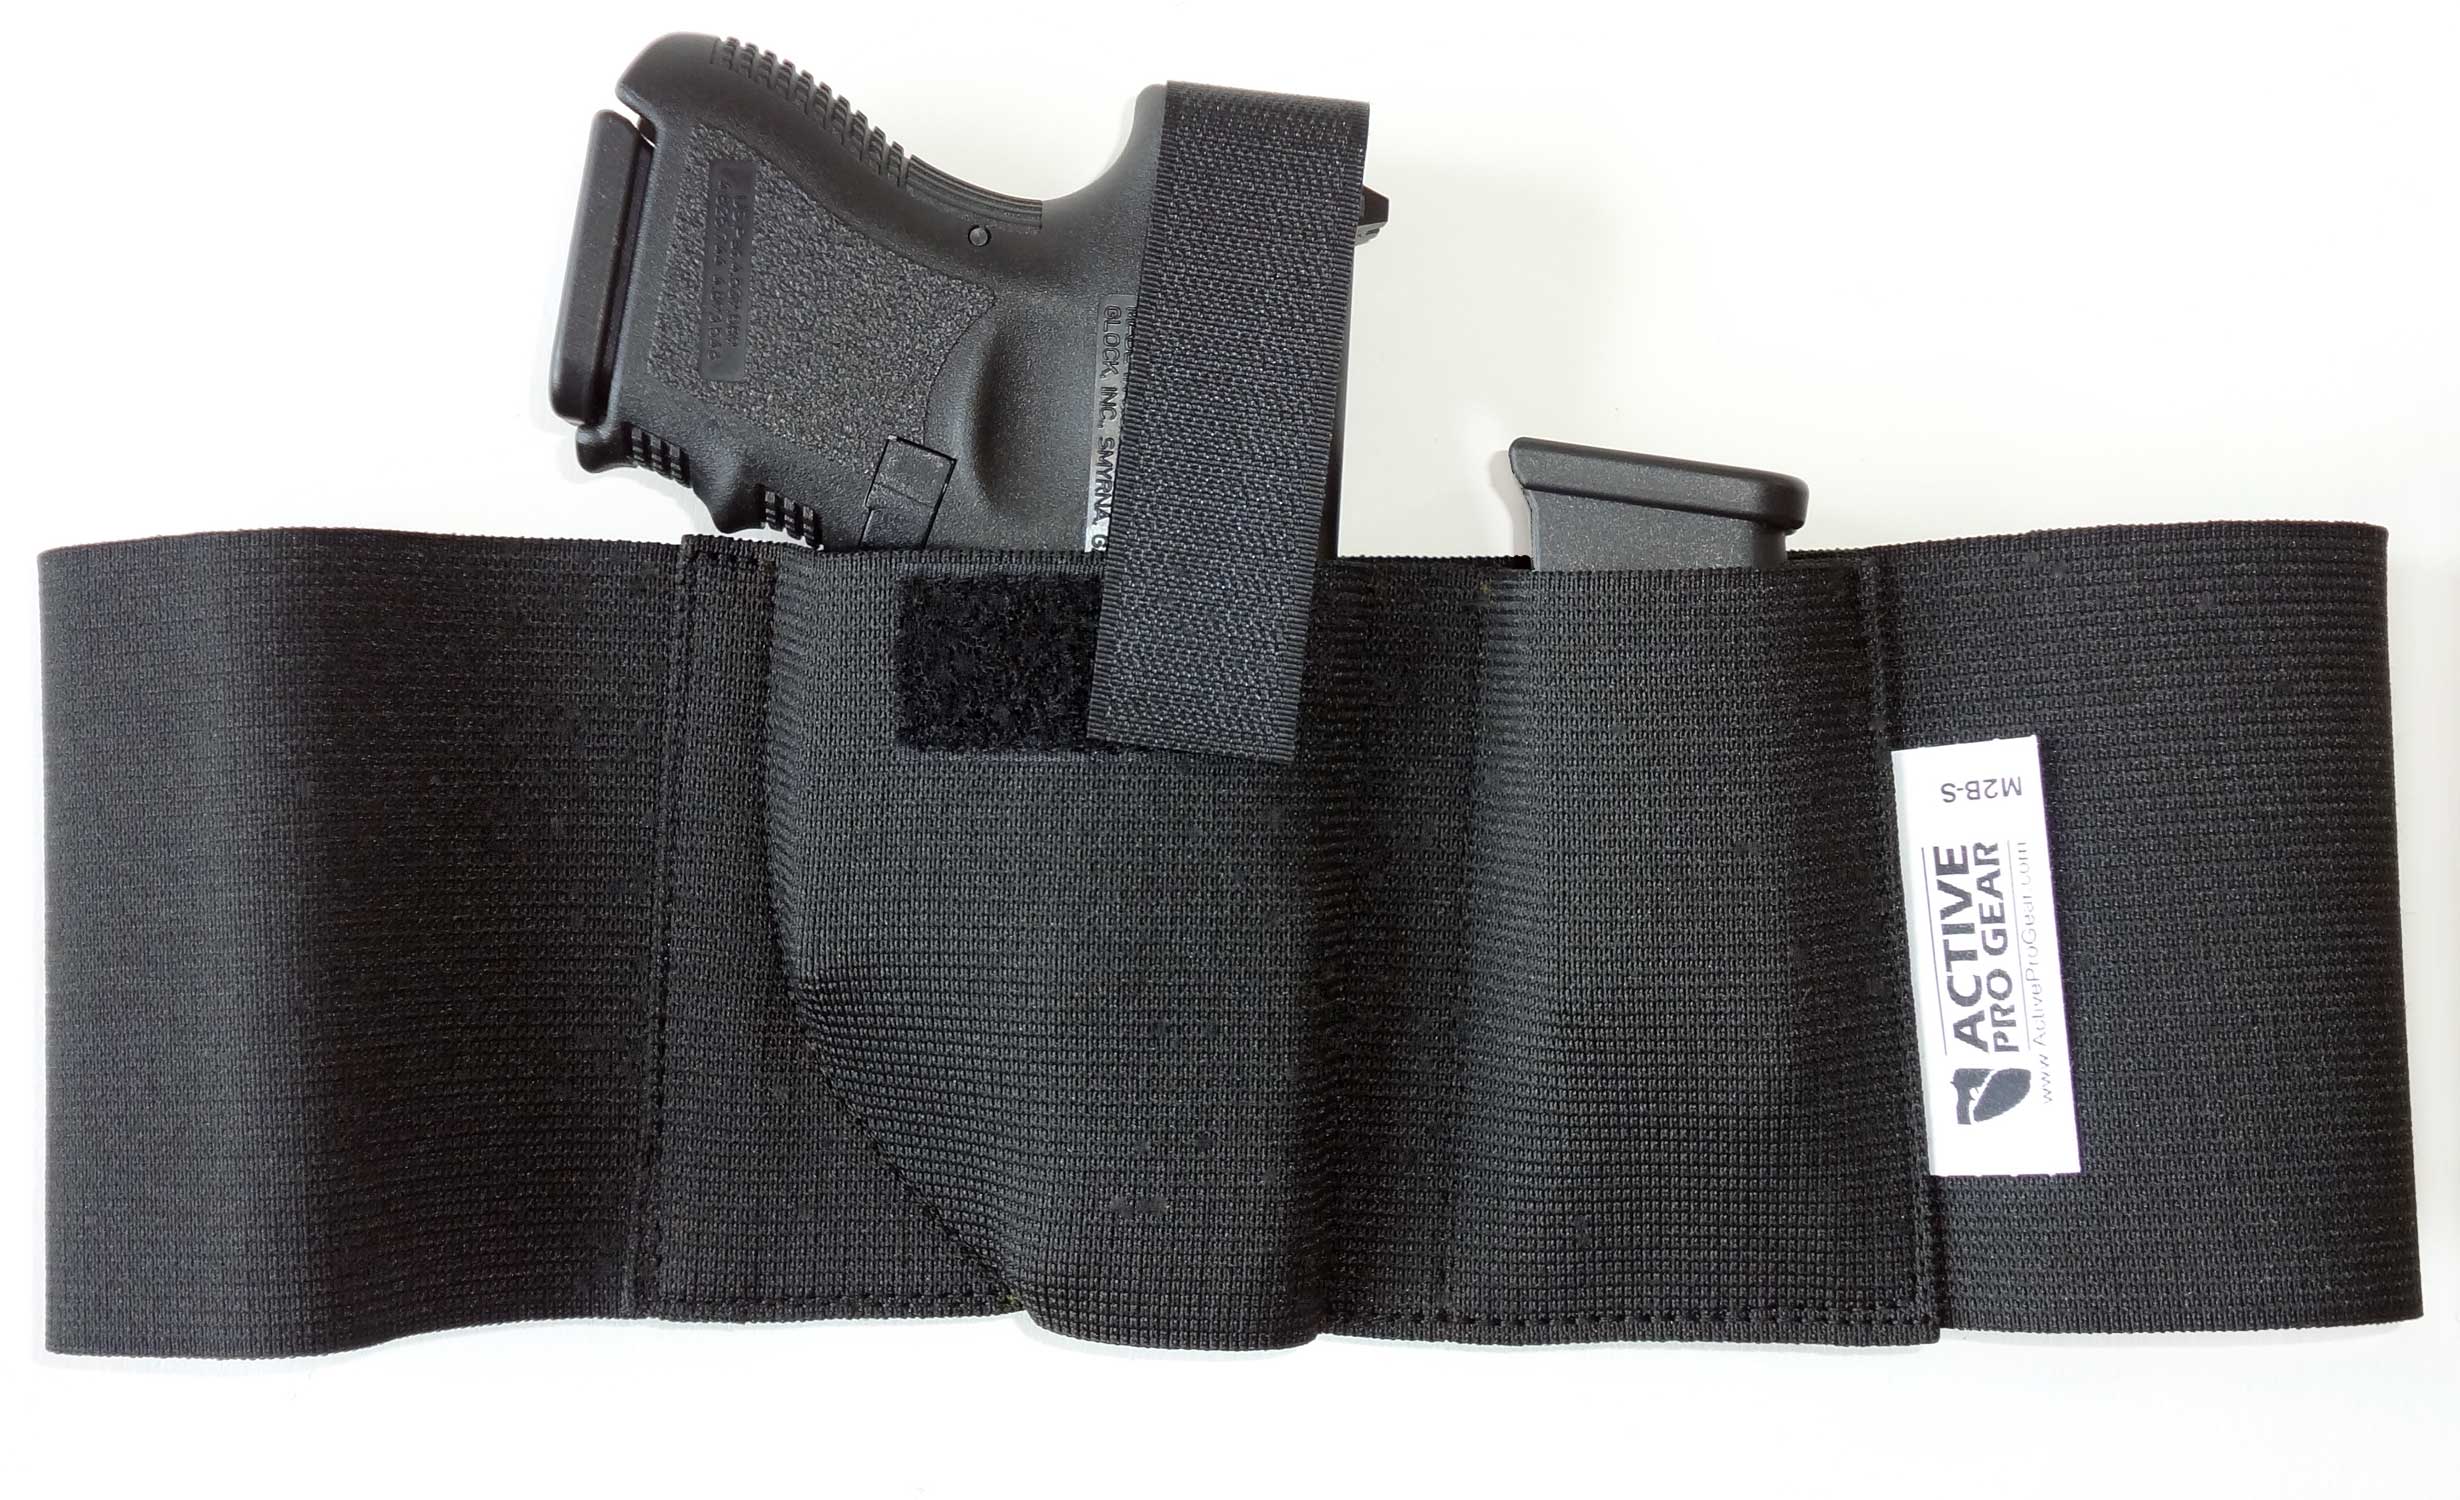 Belly Band Concealed Carry Gun Holster - Defender - Active Pro Gear